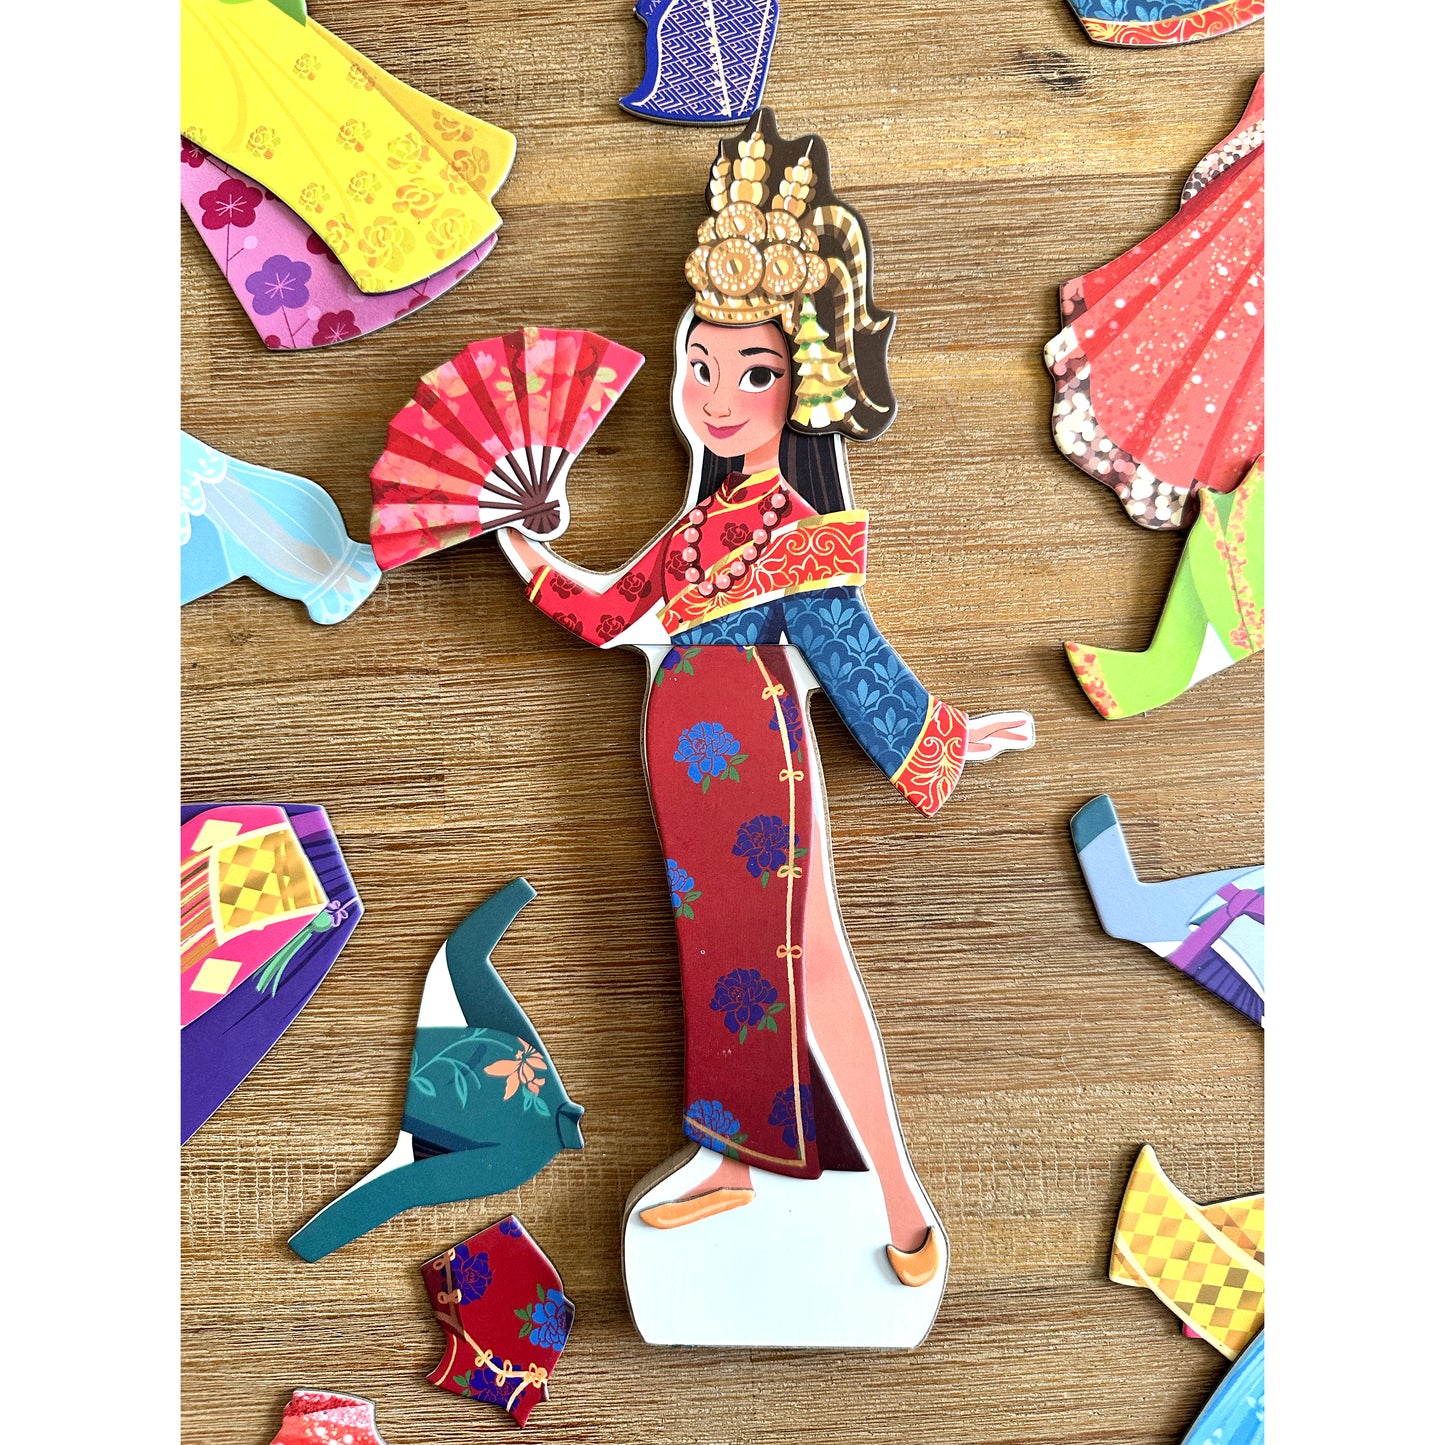 Asian Heritage Wooden Magnetic Dress Up Dolls